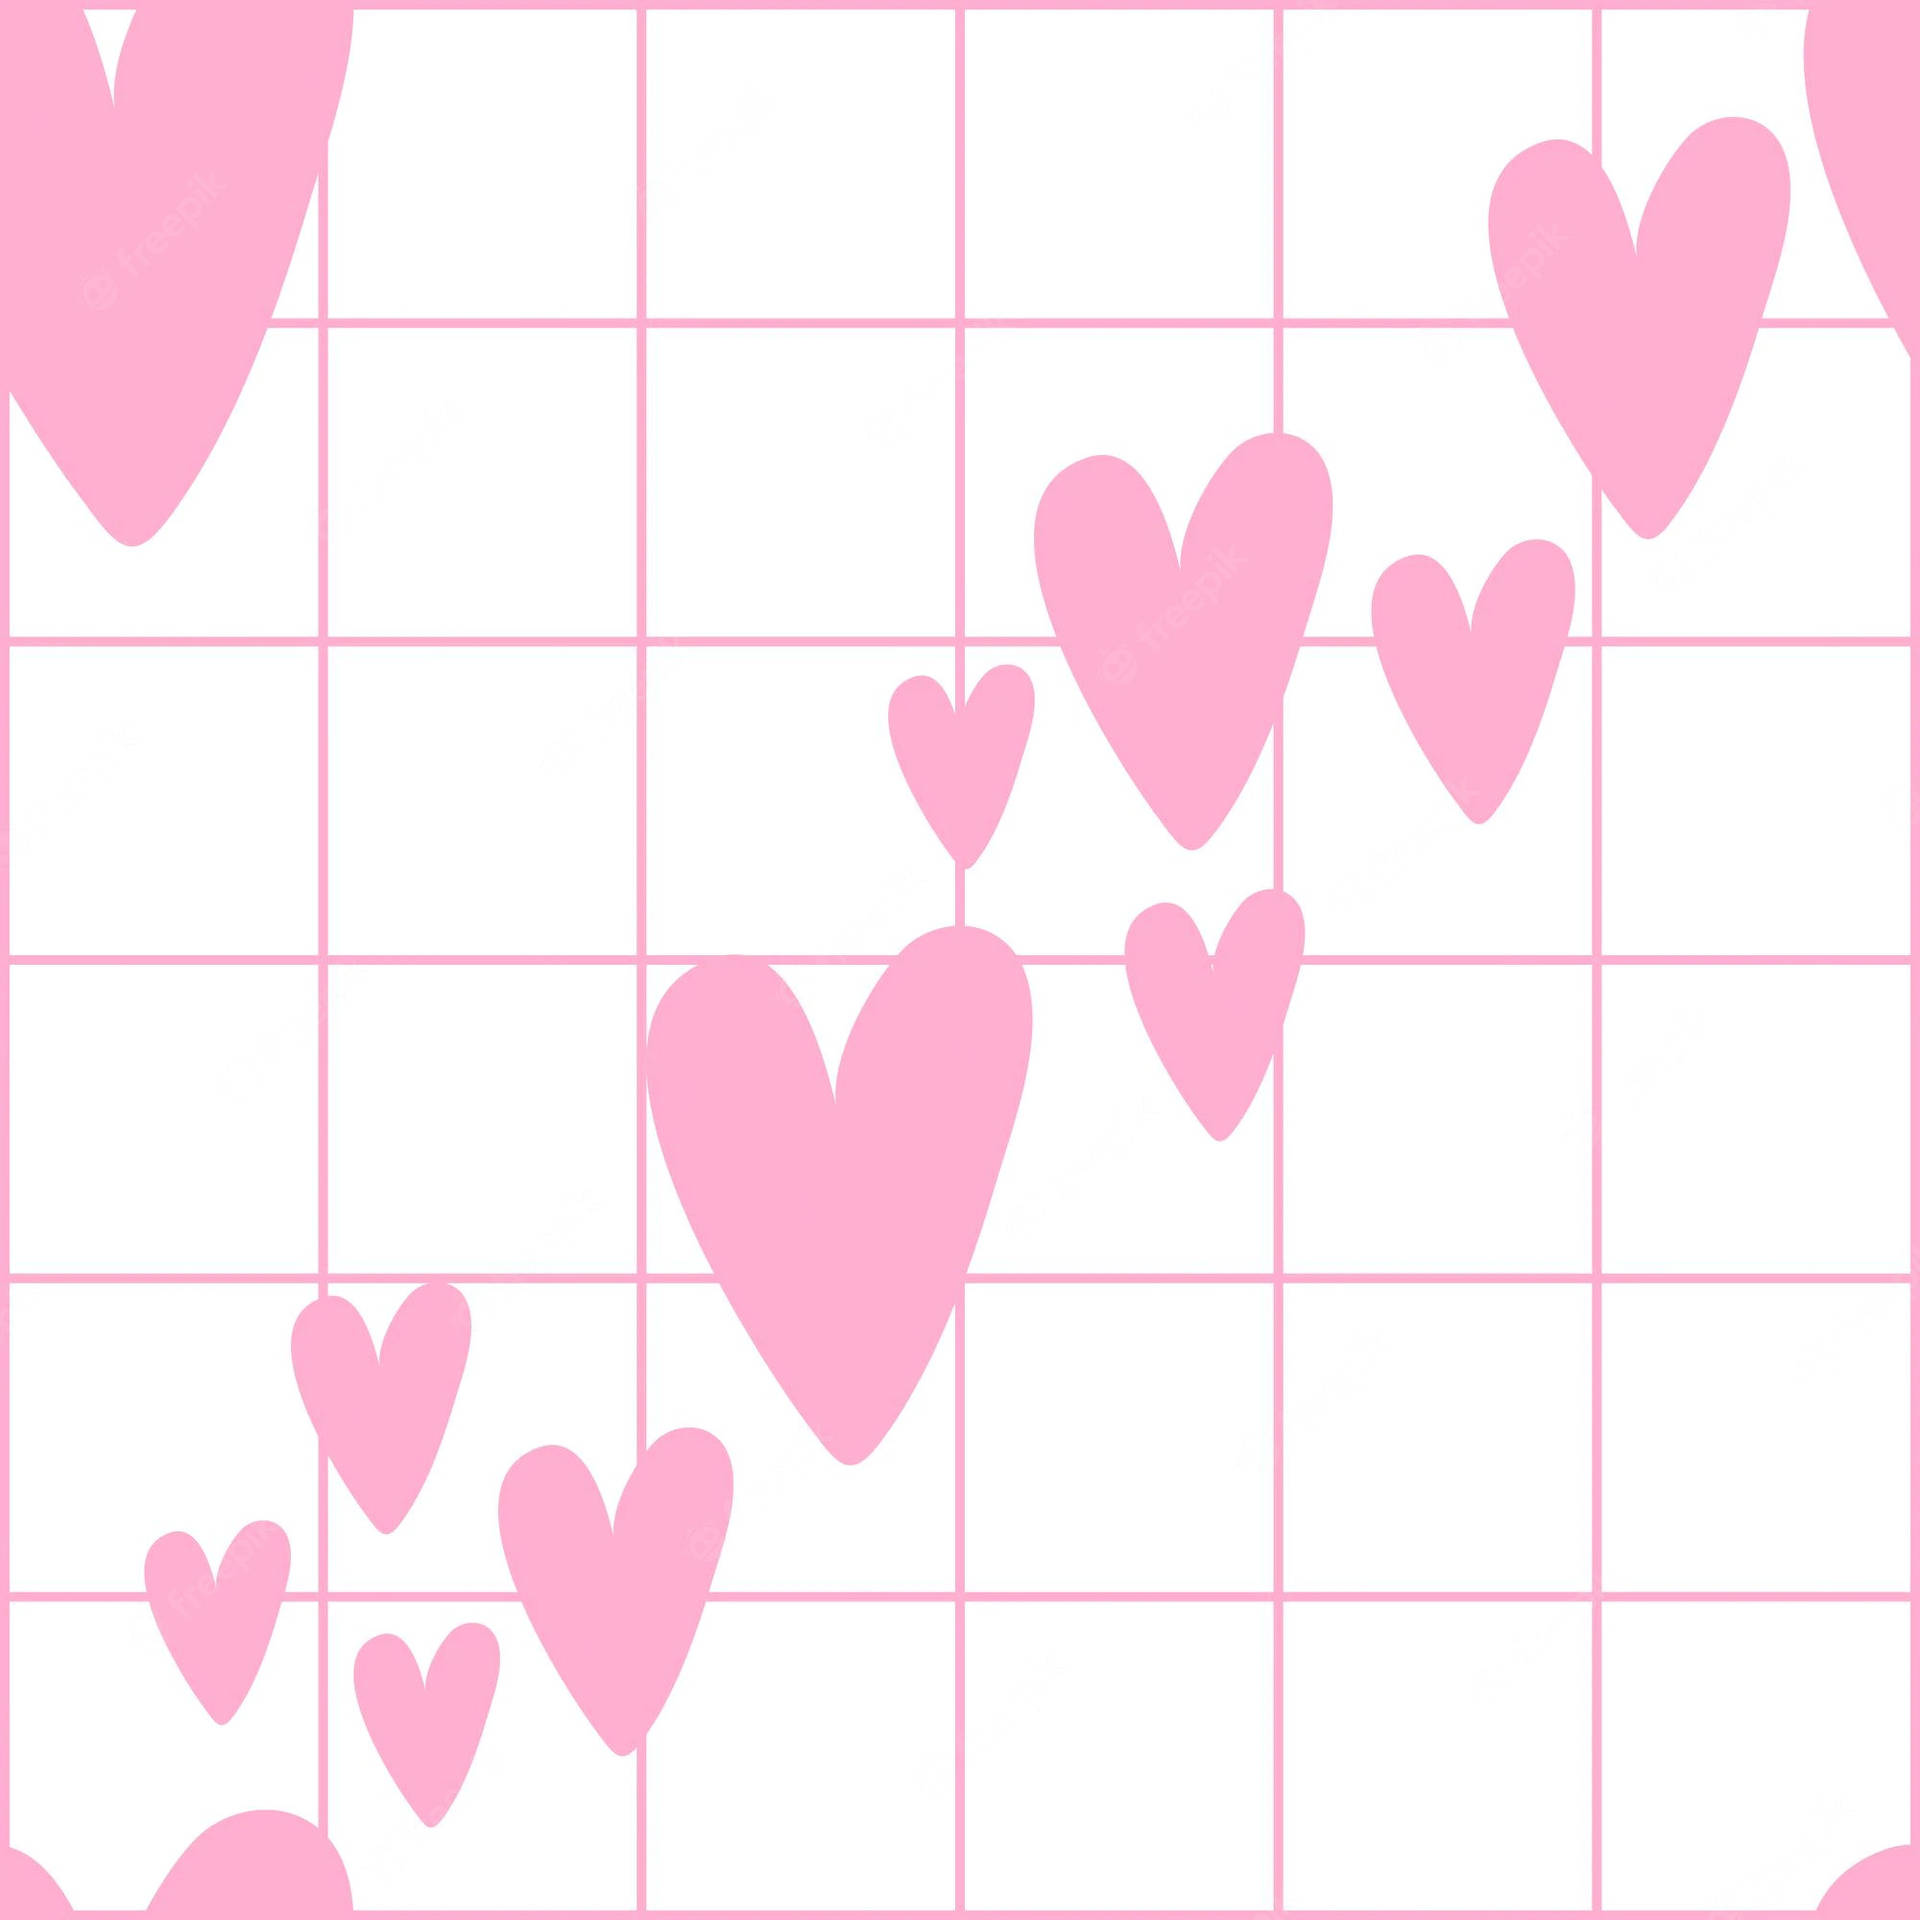 White And Pink With Hearts Grid Aesthetic Background